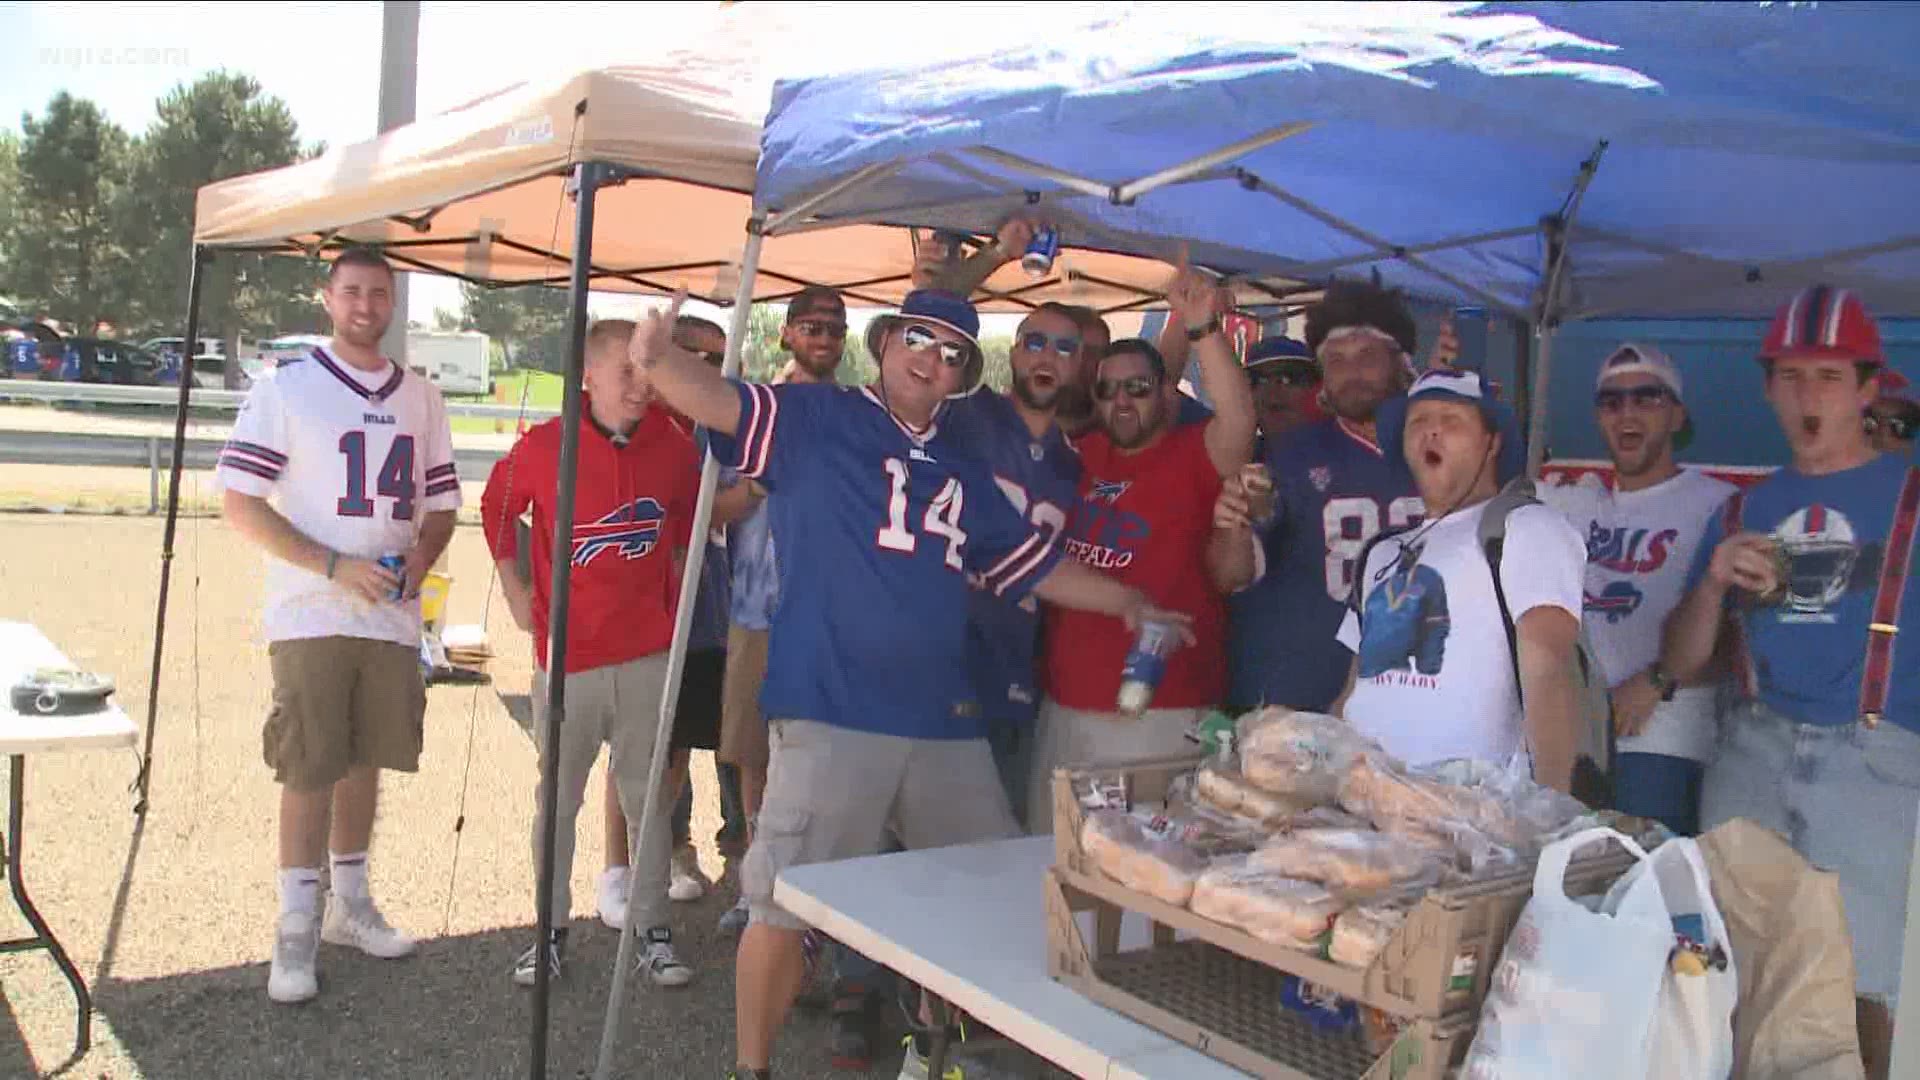 The Orchard Park community is also waiting to see what happens with Covid's impact on the upcoming Bills season in the NFL.